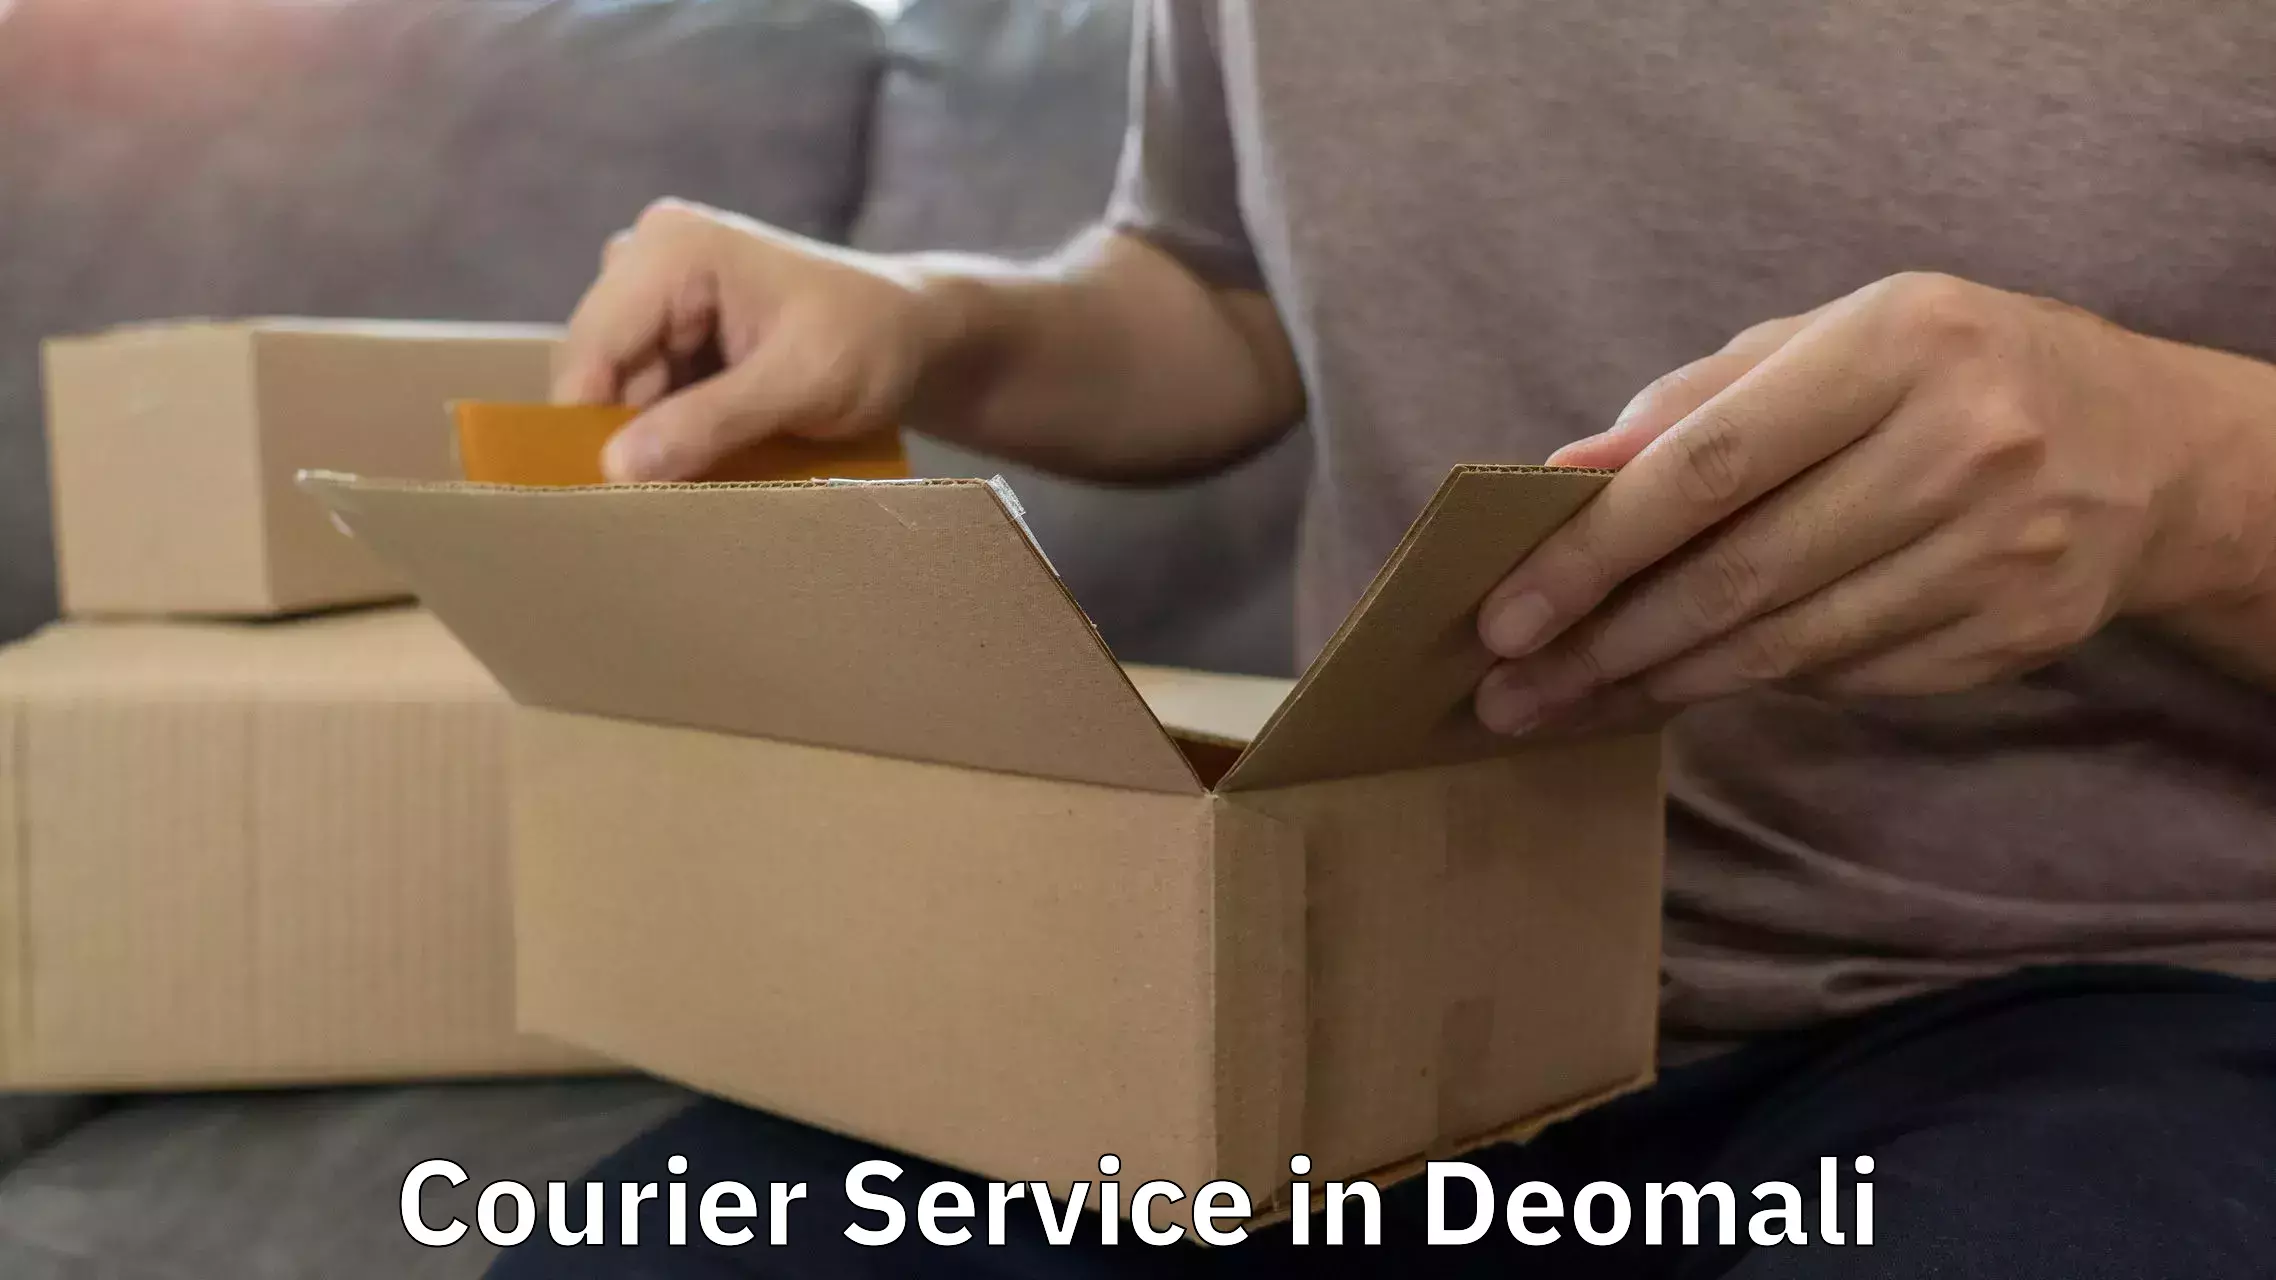 Multi-national courier services in Deomali